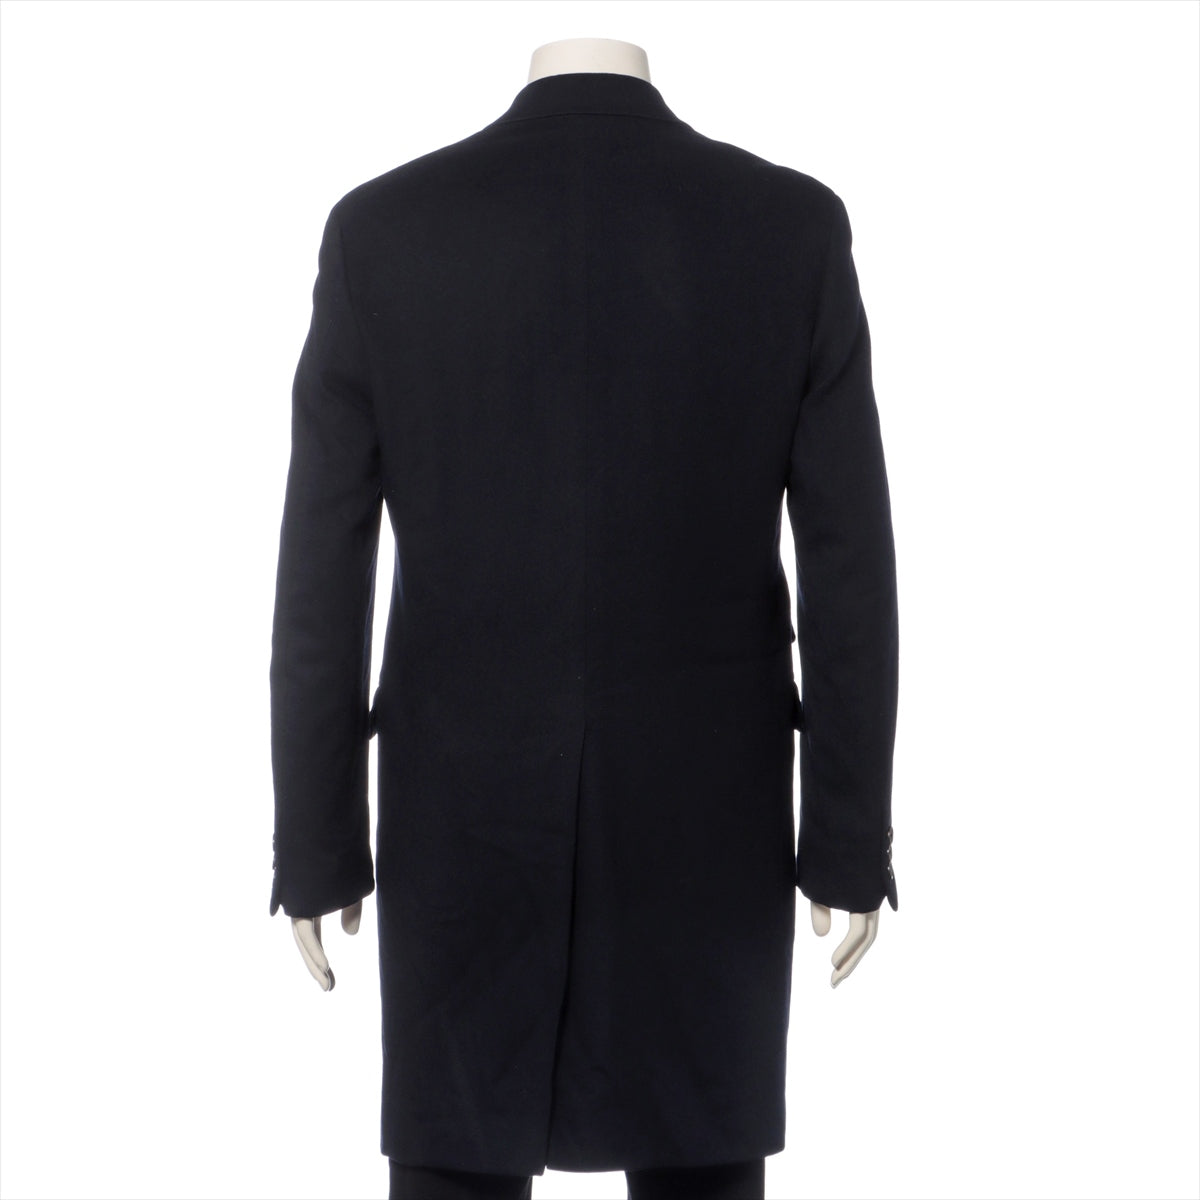 Prada Cashmere Chester Coat 48R  Naive UC333D Clothed Casimir Shirted  Clothes